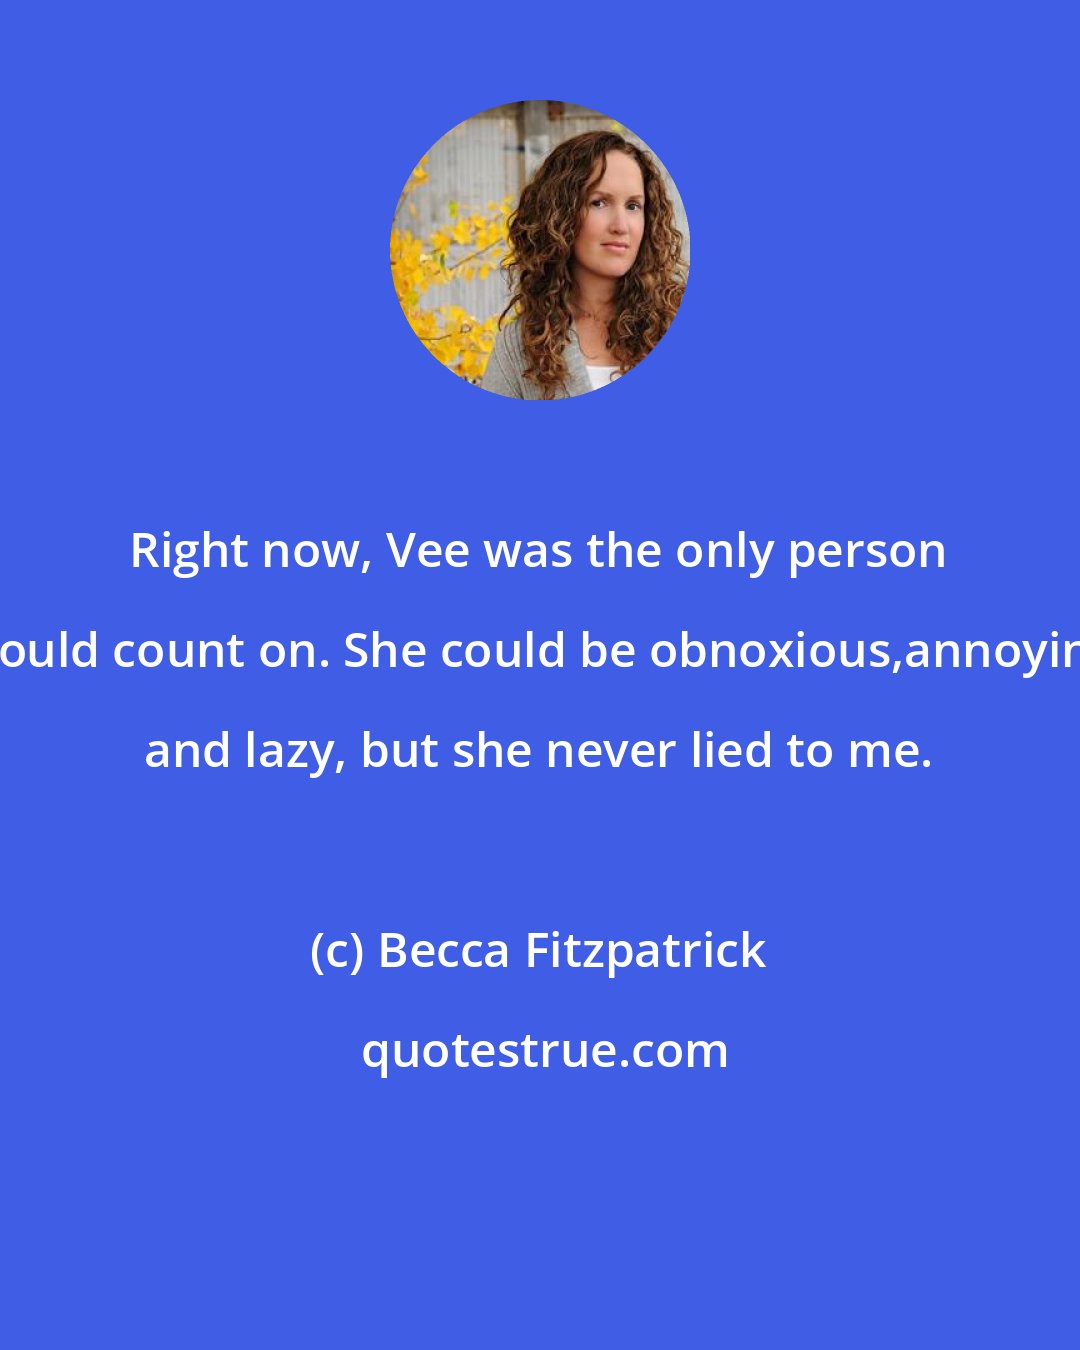 Becca Fitzpatrick: Right now, Vee was the only person I could count on. She could be obnoxious,annoying, and lazy, but she never lied to me.